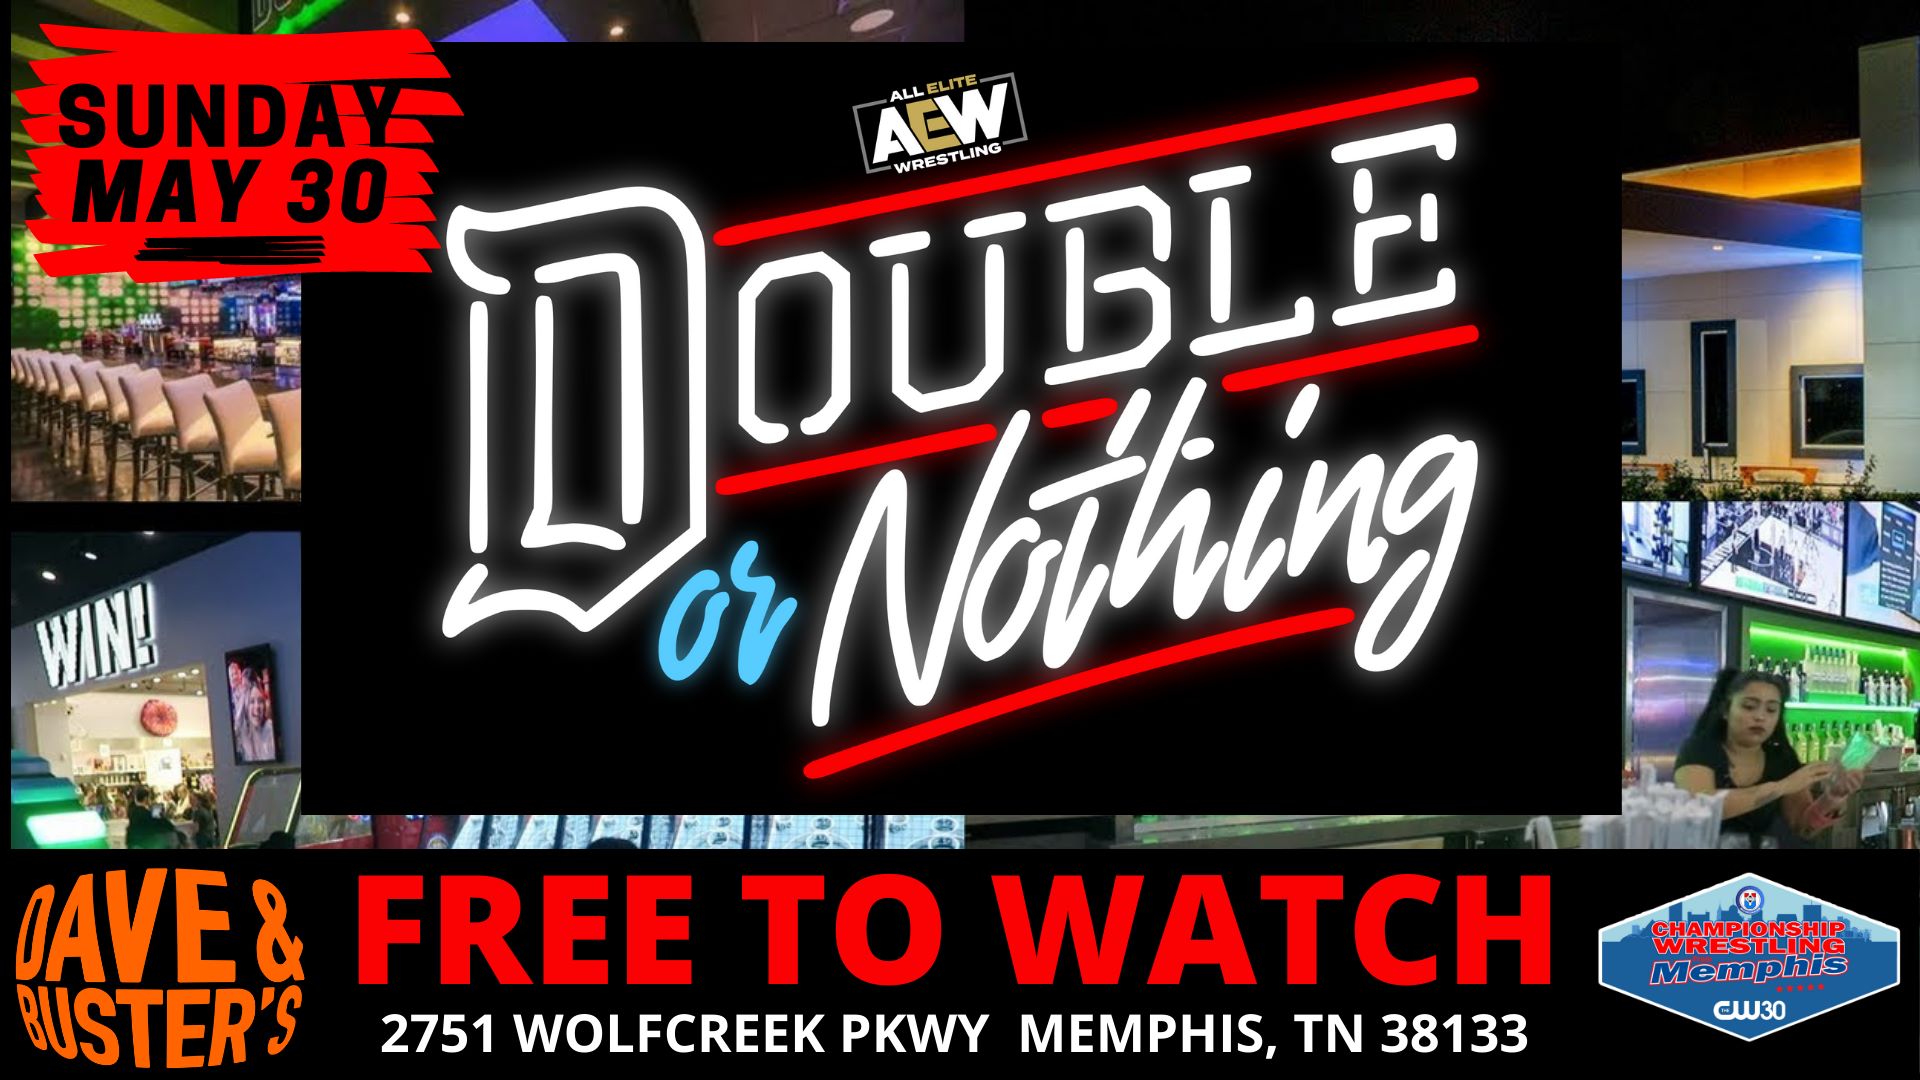 Wrestling News Center AEW Double or Nothing Watch Party at Dave and Busters Memphis, TN Sunday, May 30th